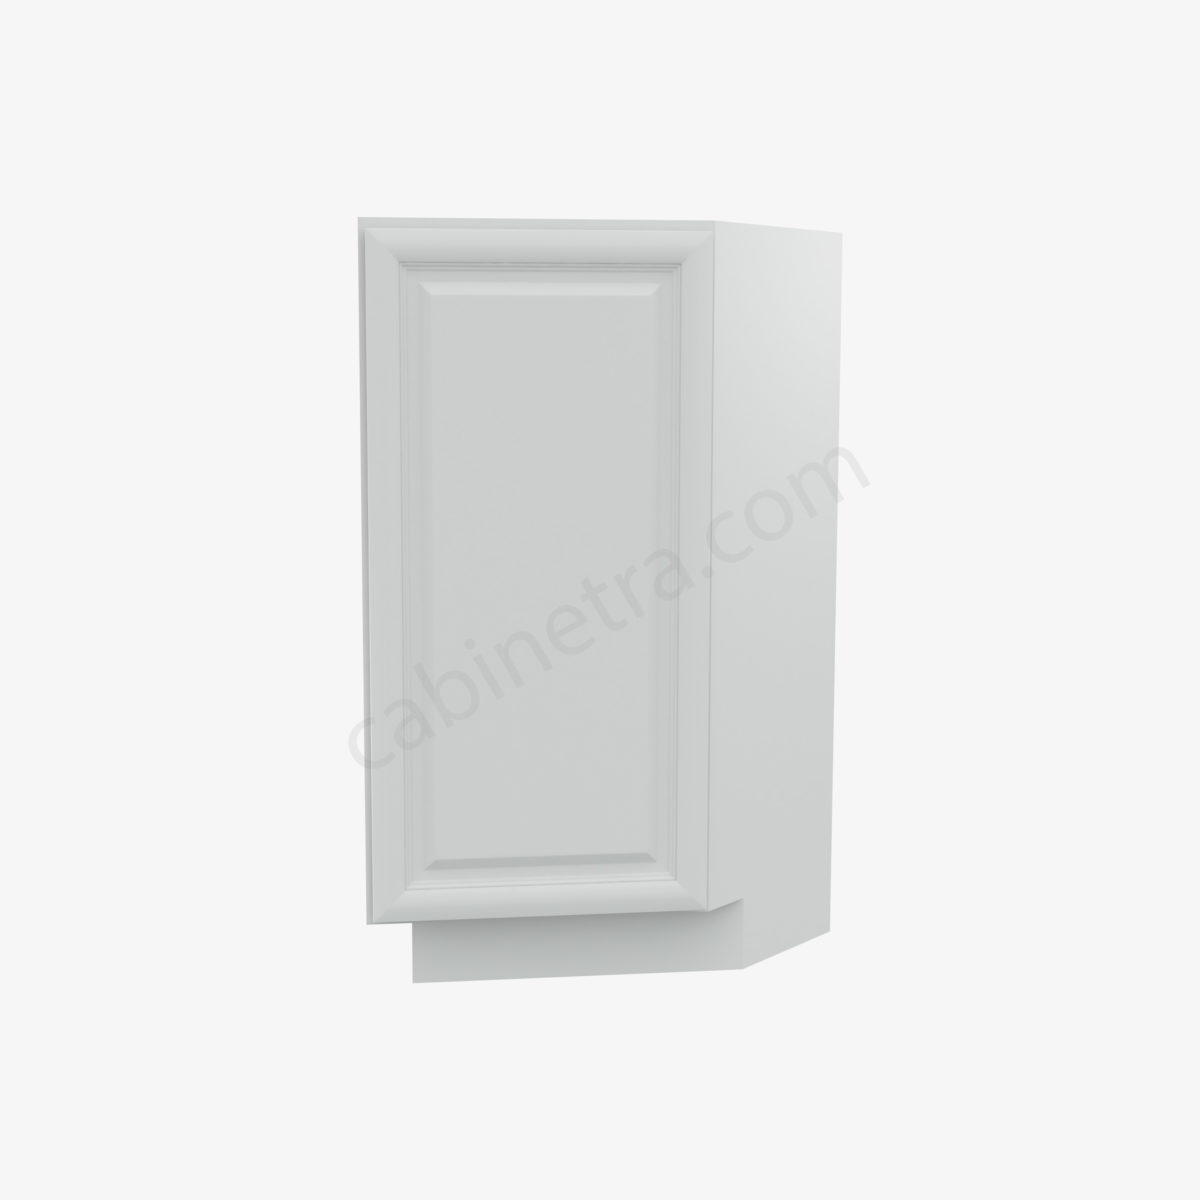 KW BBLC45 48 42W 0  Forevermark K White Cabinetra scaled